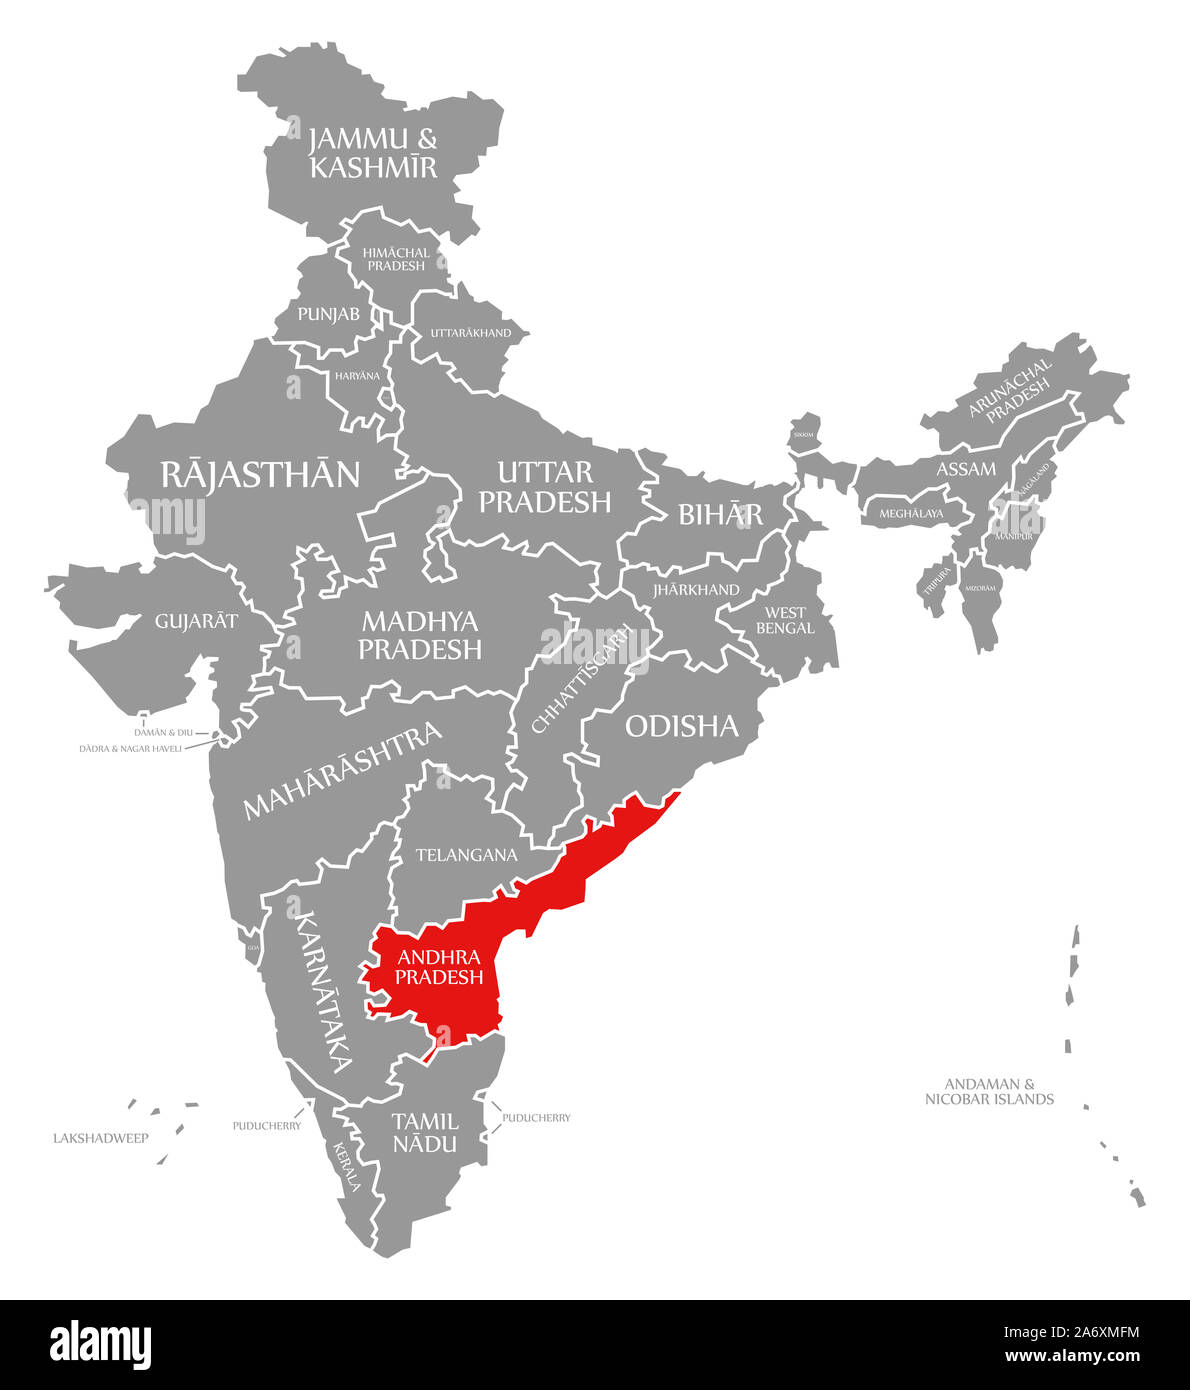 Andhra Pradesh red highlighted in map of India Stock Photo